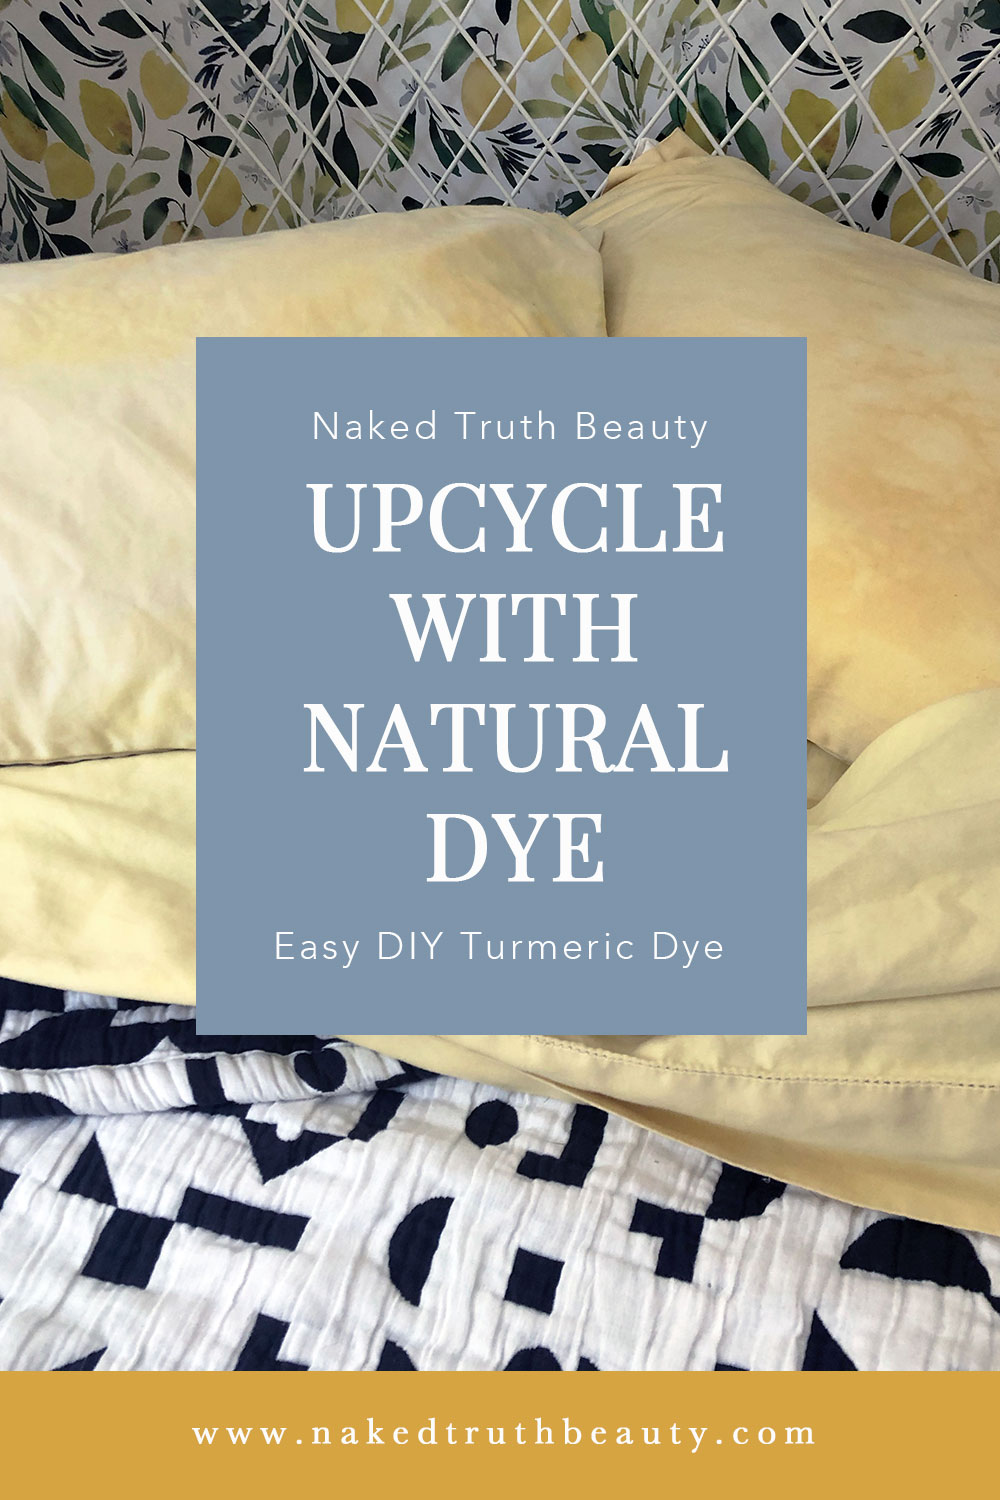 Upcycle old sheets and clothes with easy DIY turmeric dye / How to do DIY Natural Dye